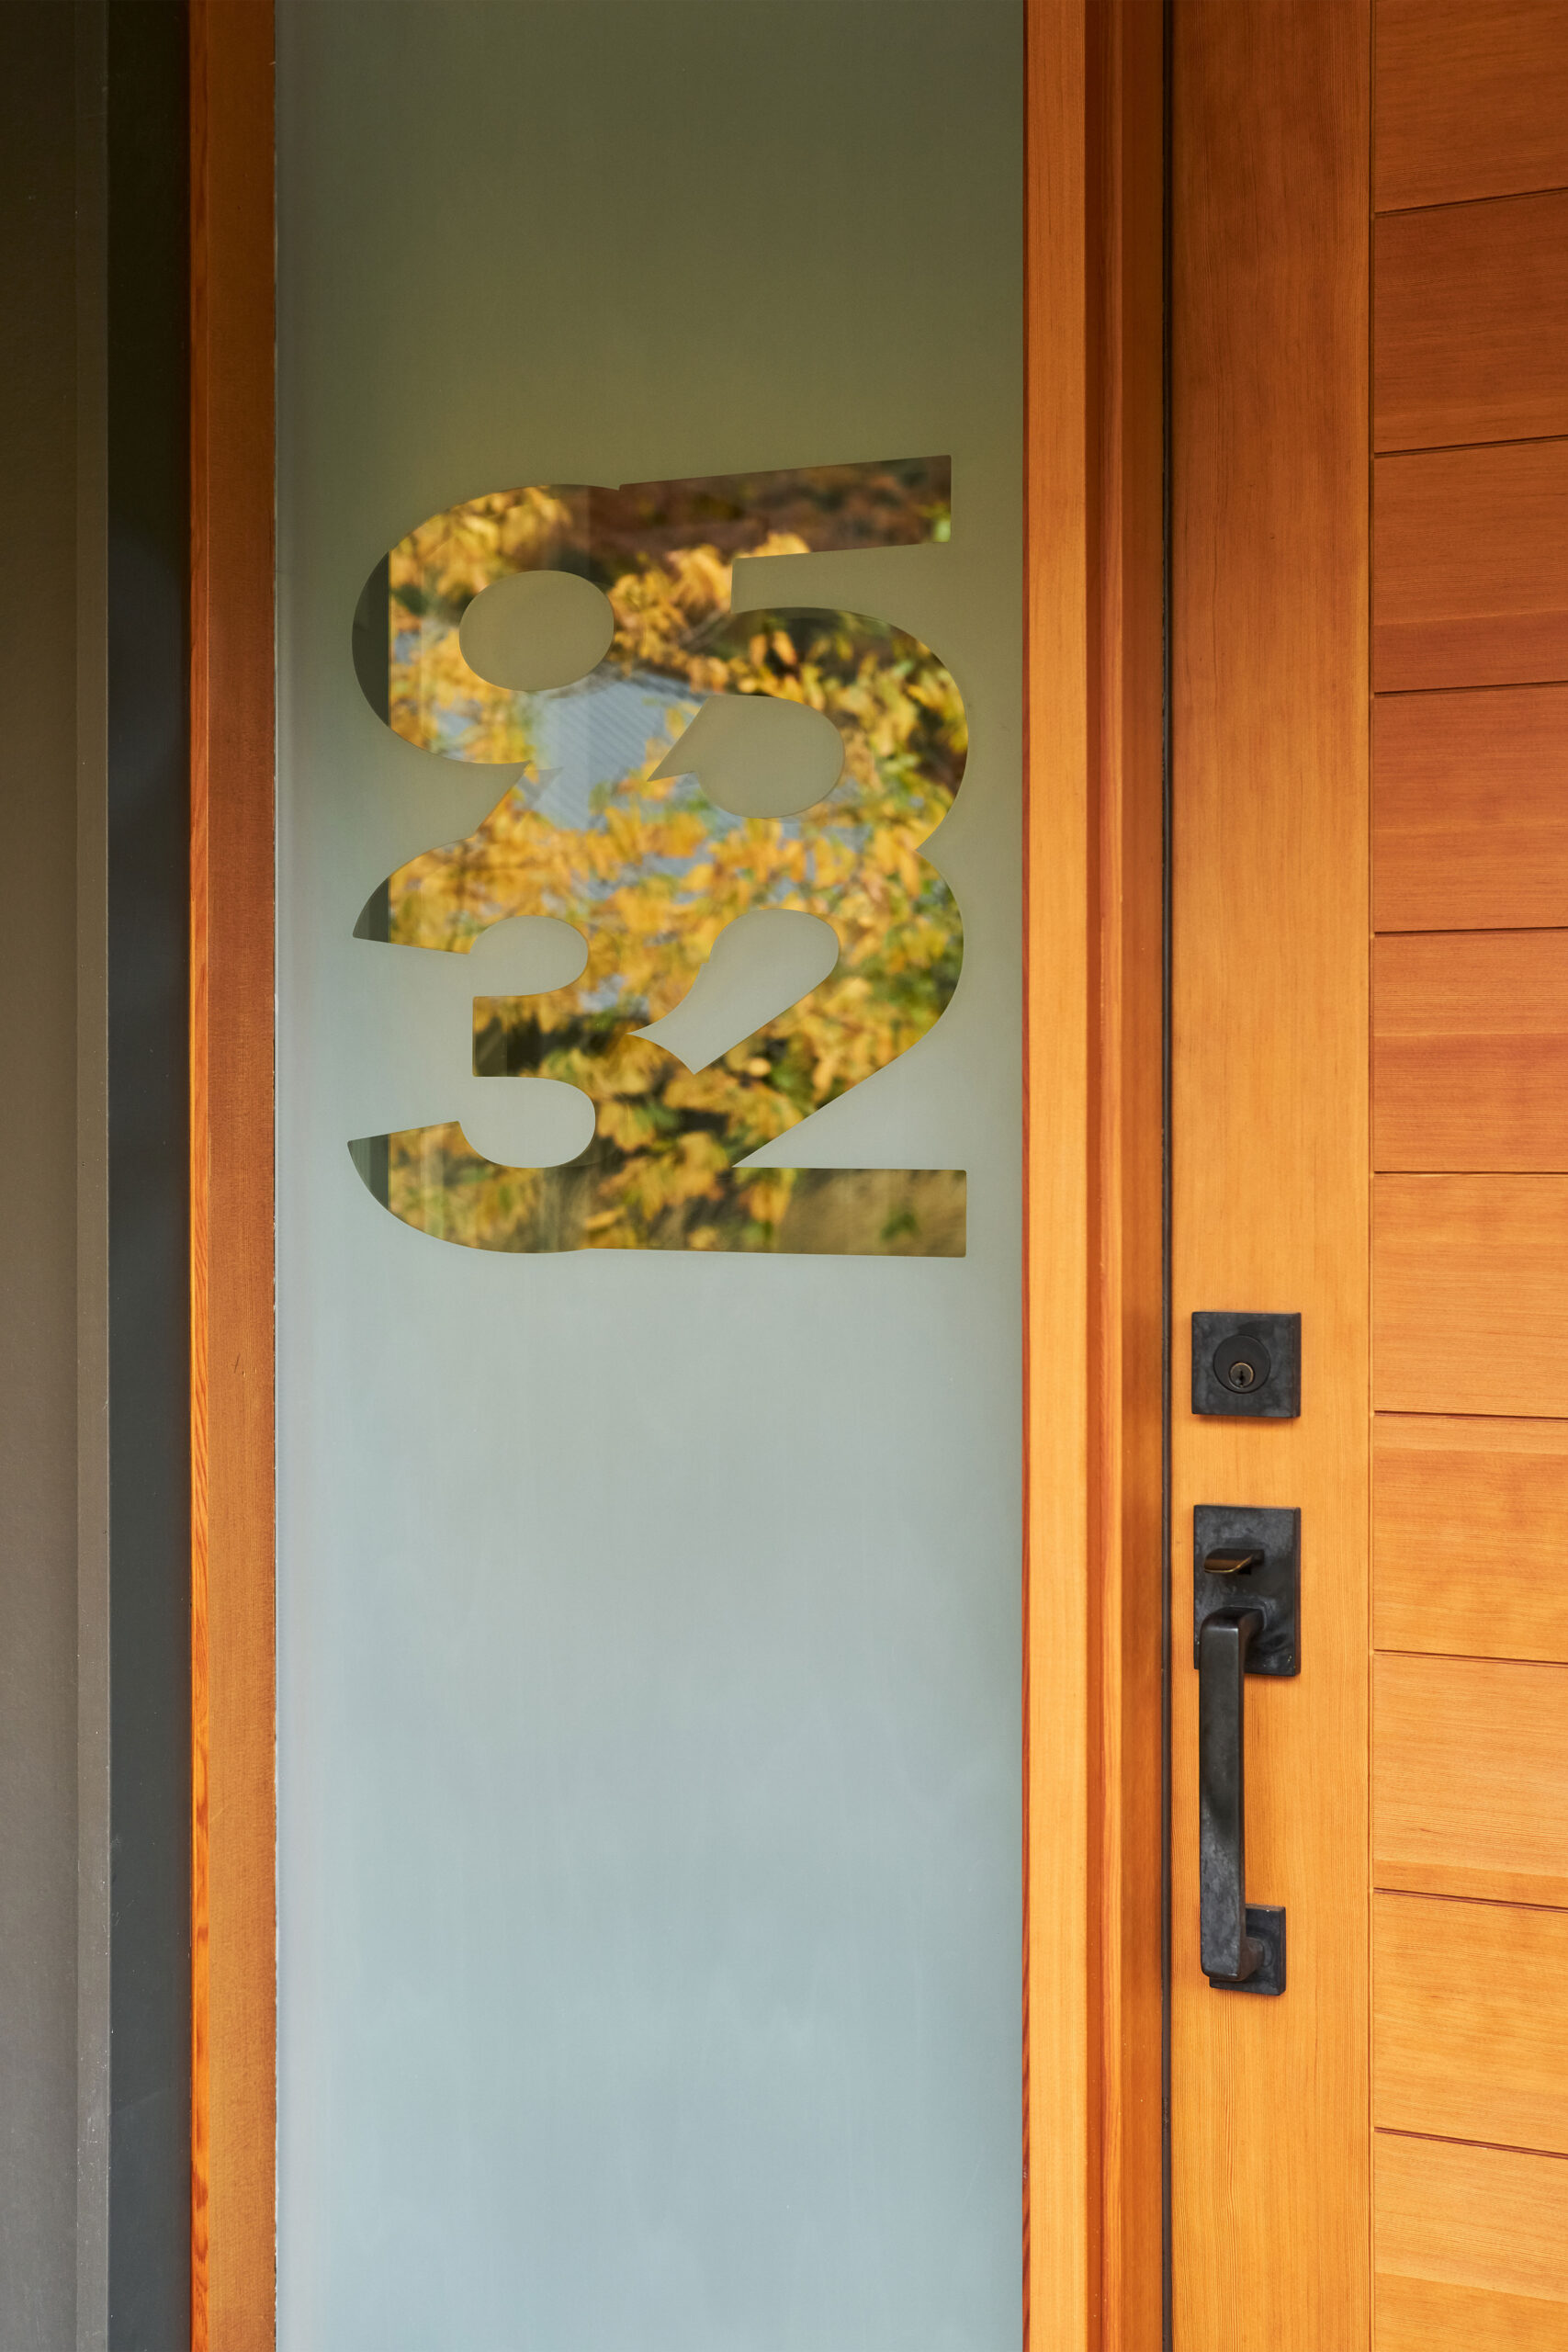 A glass sidelight features the street address numbers 9 5 3 2. The adjacent door is made of fir and features horizontally jointed wood and black hardware.